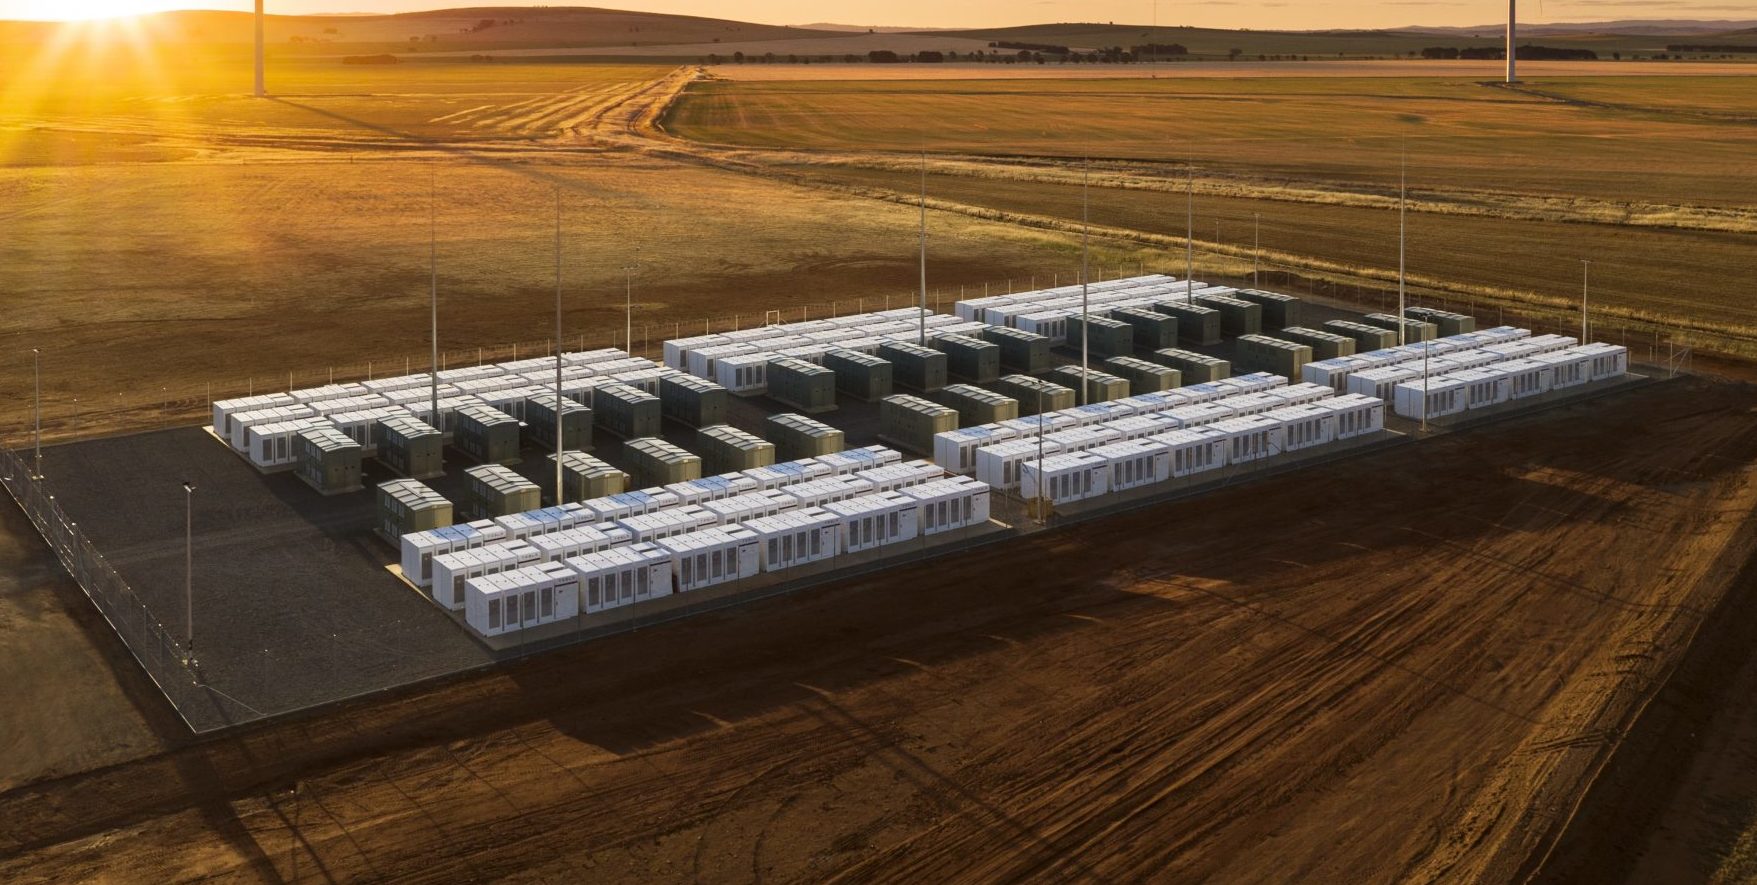 Tesla’s Powerpack farm in South Australia is about to get 50% larger